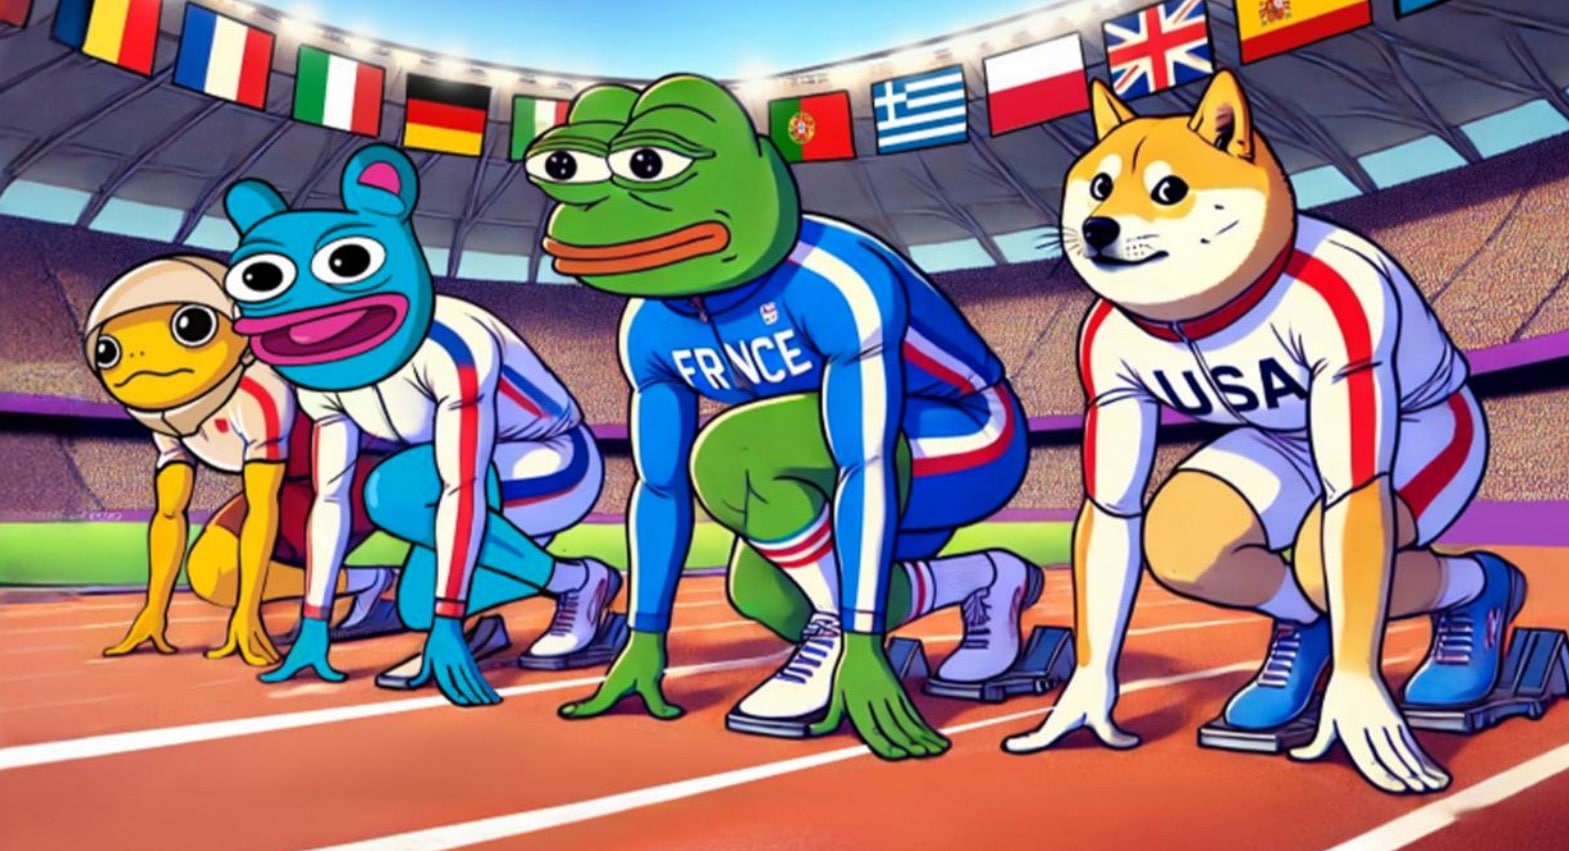 Paris Olympics Opens Today – Solympics Price Soars 34% As The Meme Games Roars Past $267,000